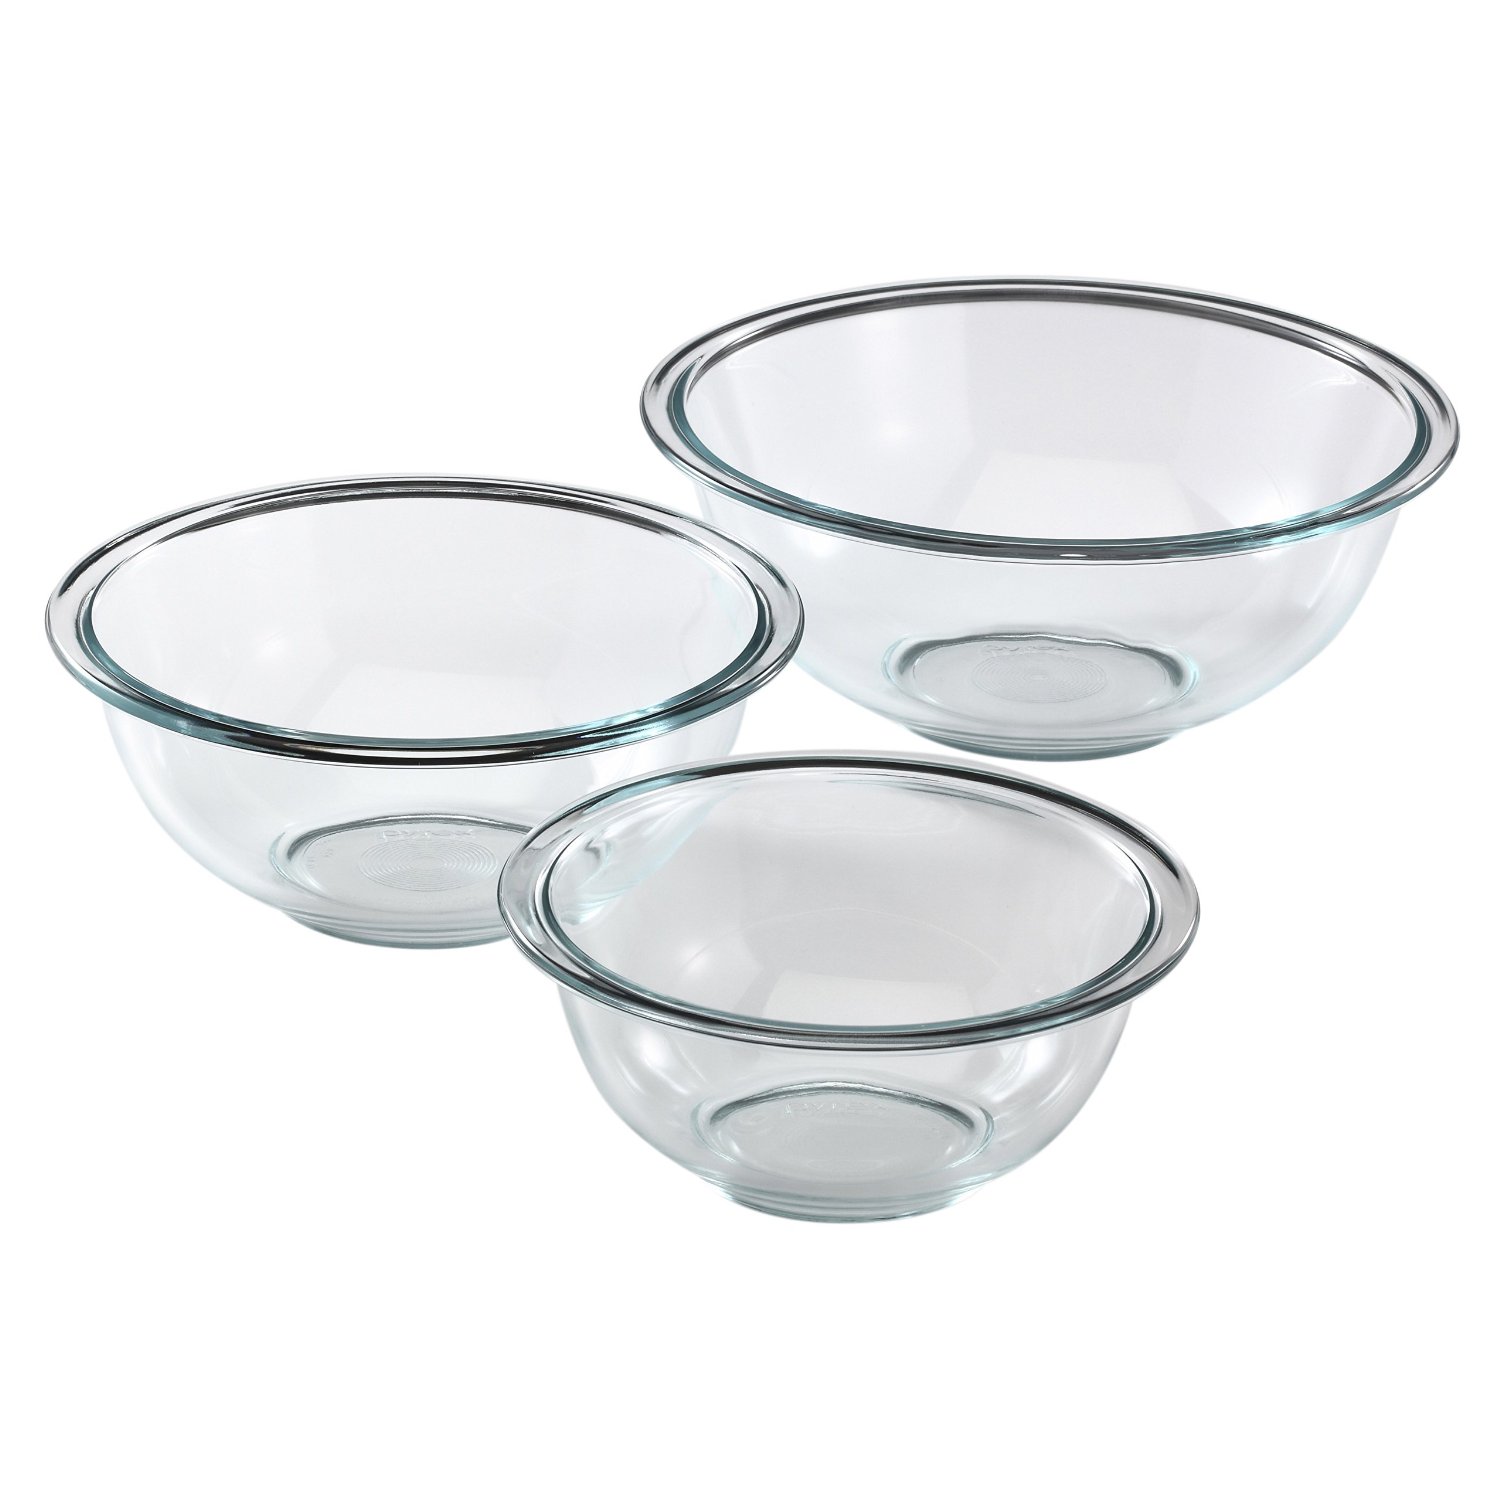 Pyrex 3 Piece Glass Mixing Bowl Set Only 11 31 My Momma Taught Me